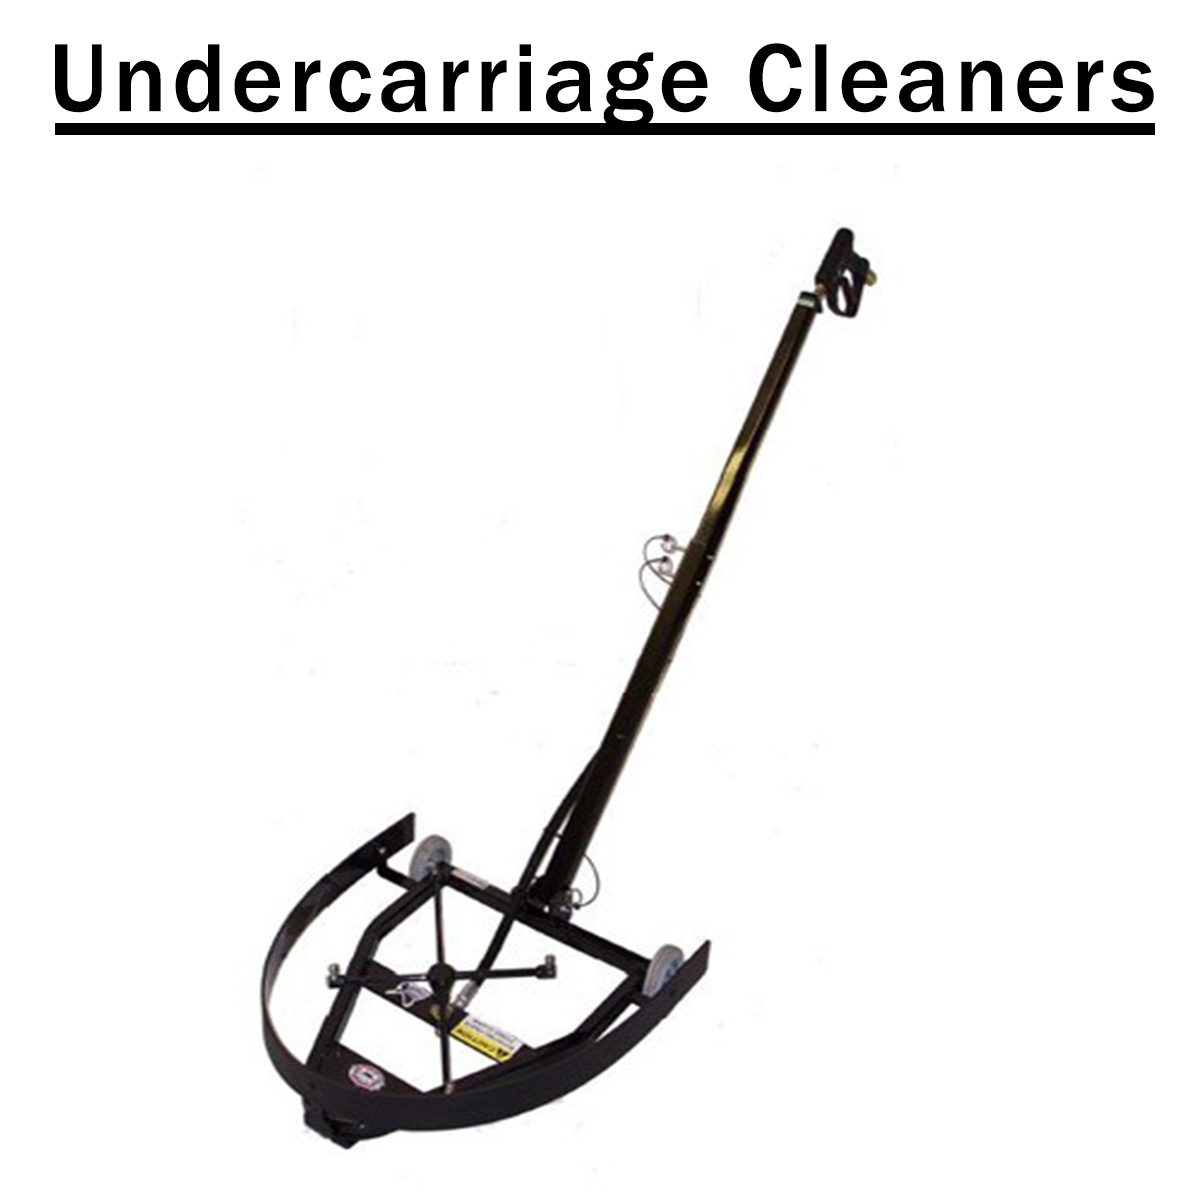 Undercarriage Cleaners